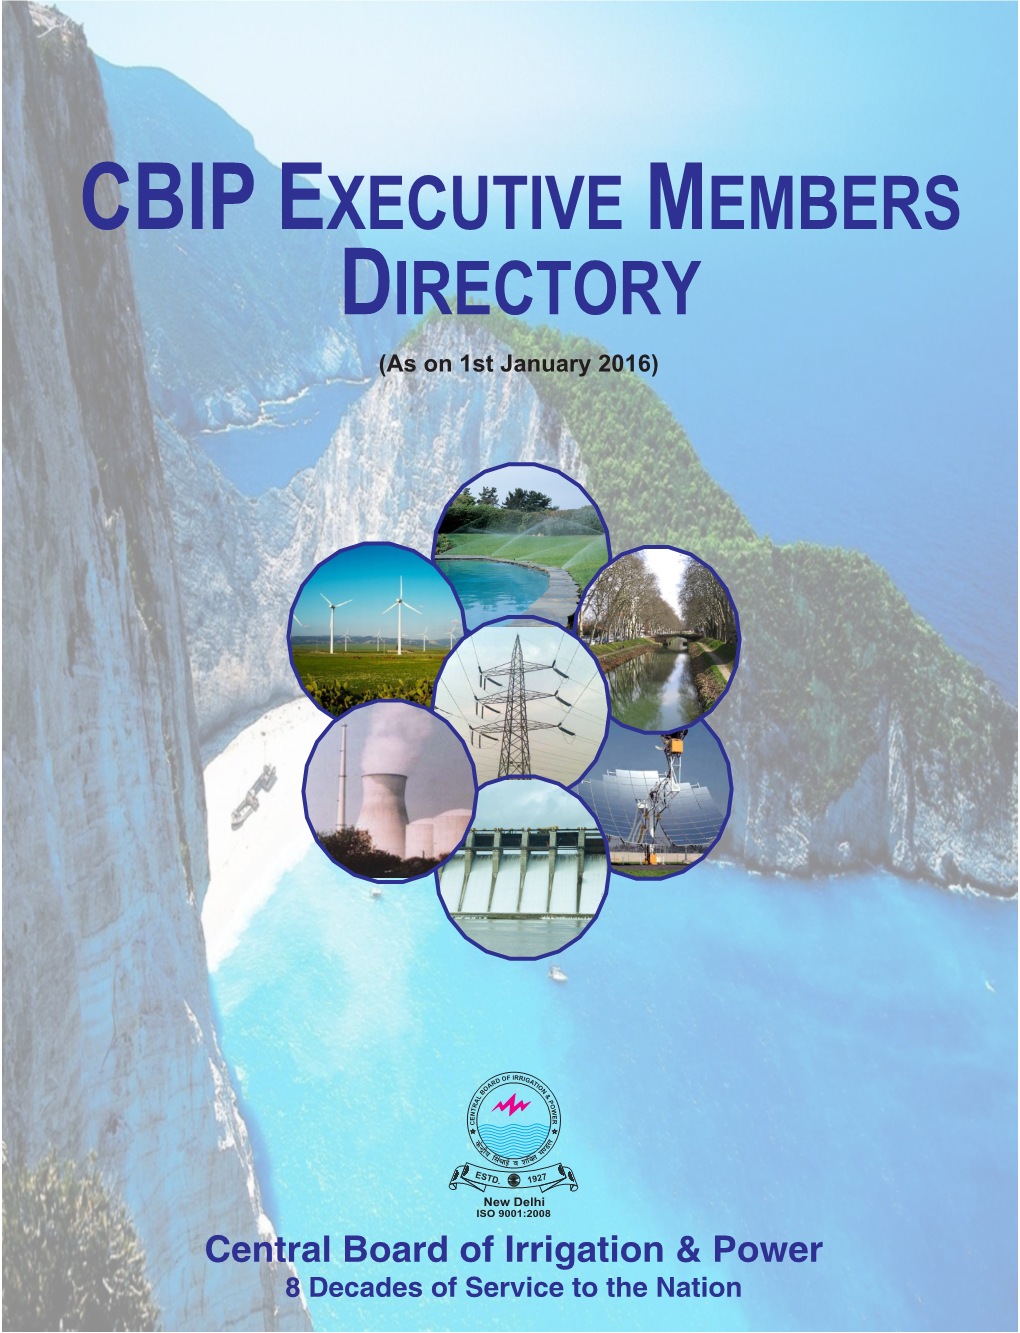 CBIP EXECUTIVE MEMBERS DIRECTORY (As on 1St January 2016)